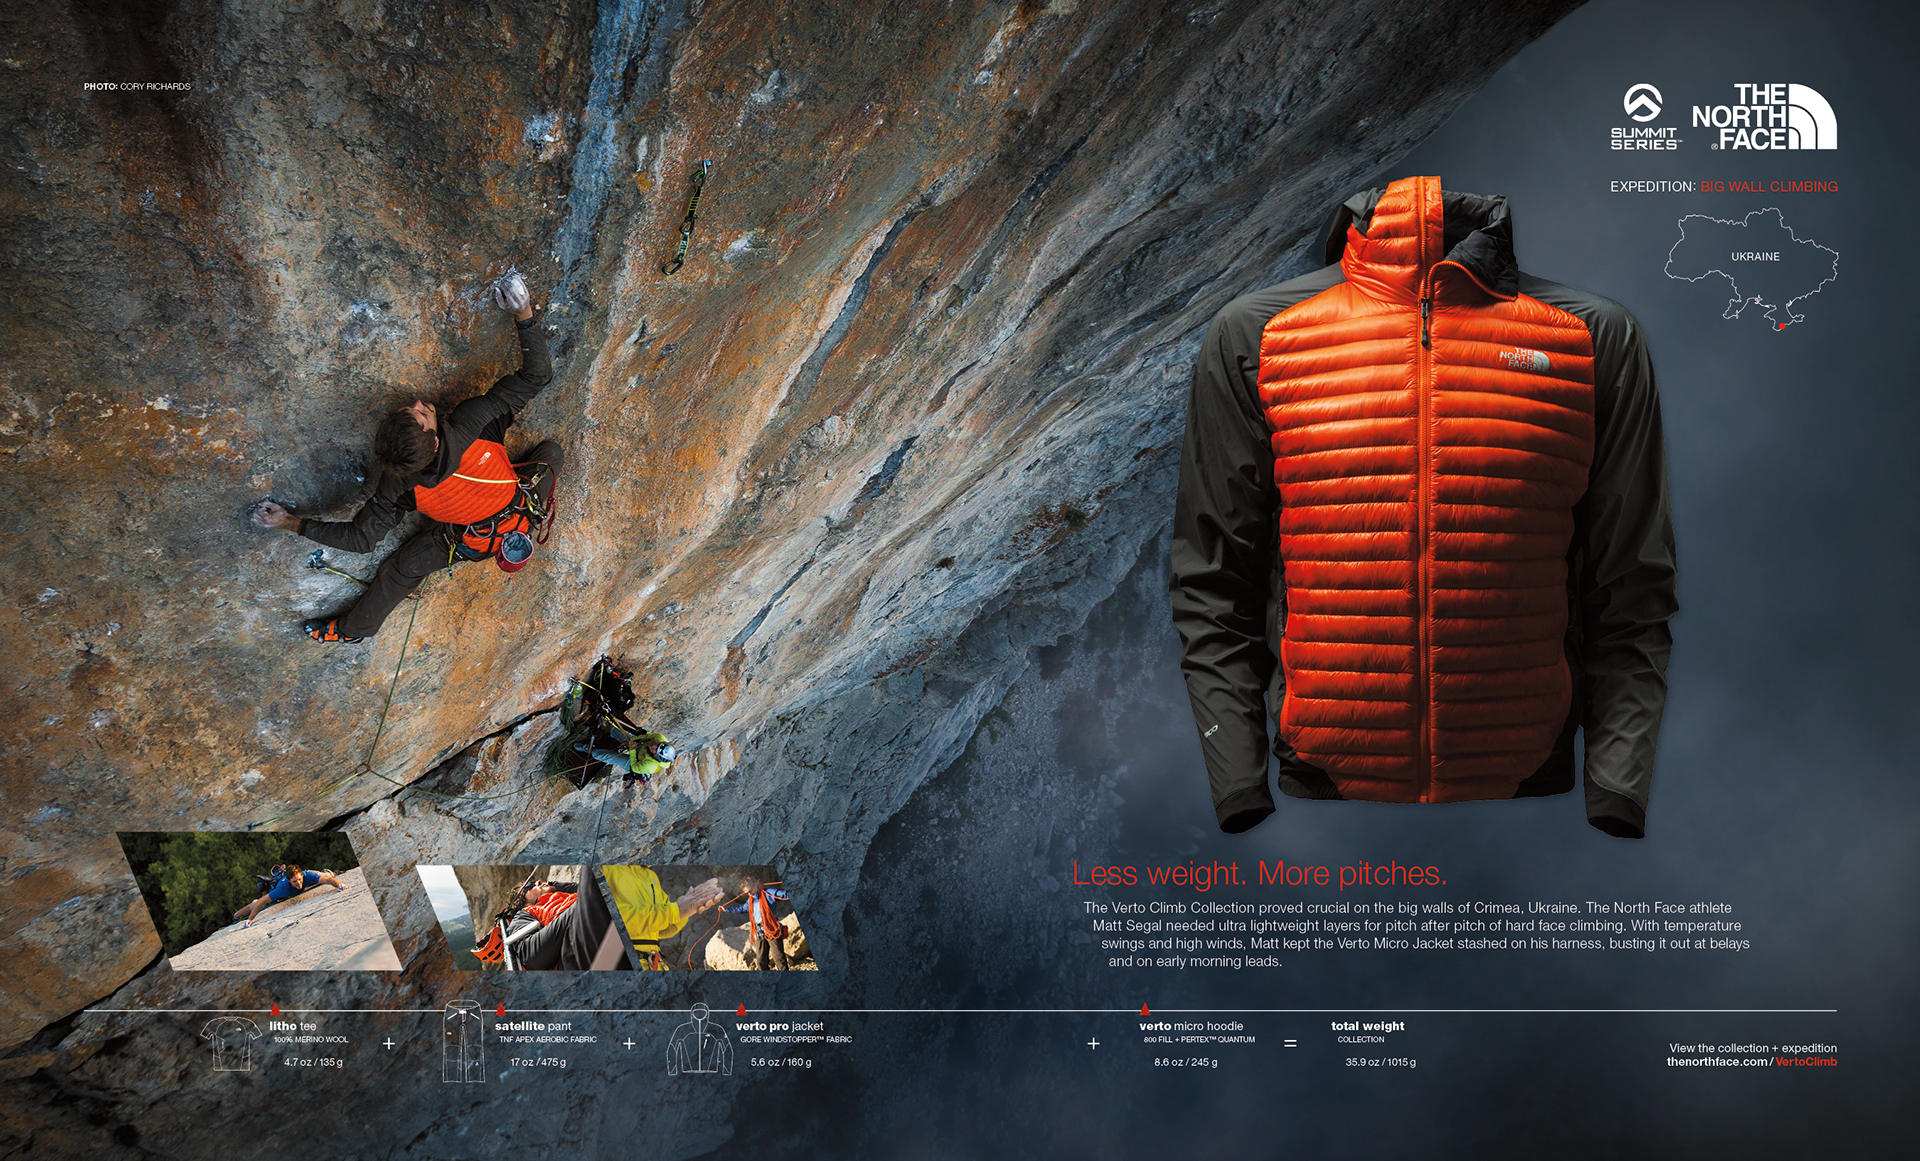 The North Face : Verto Climb Collection 2012 on Behance